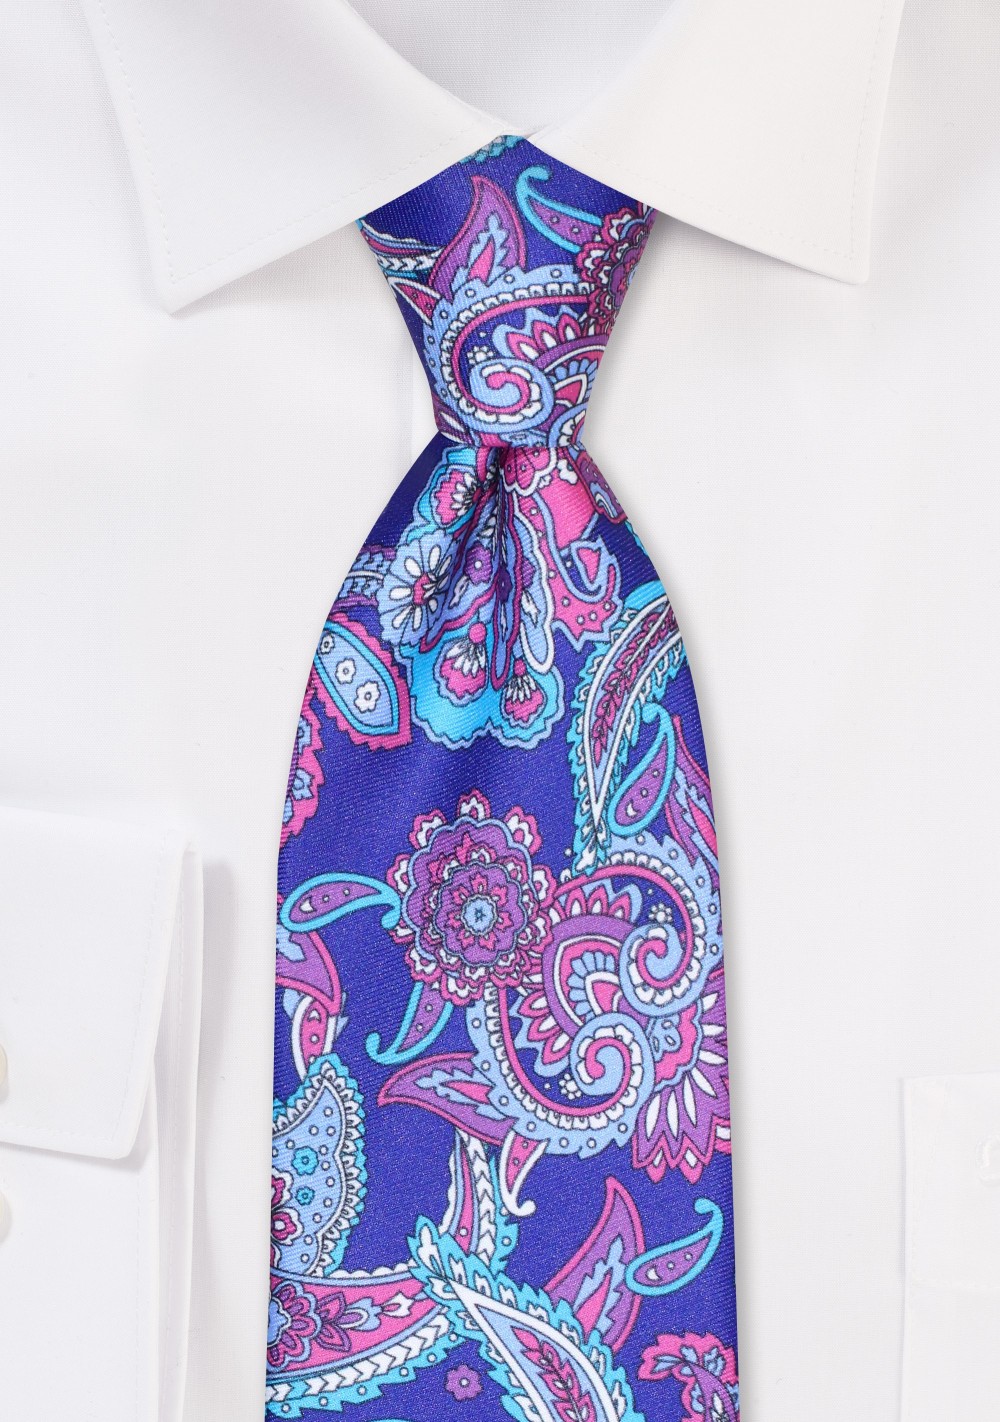 Paisley Tie in Purple, Lilac, Pink, and Aqua